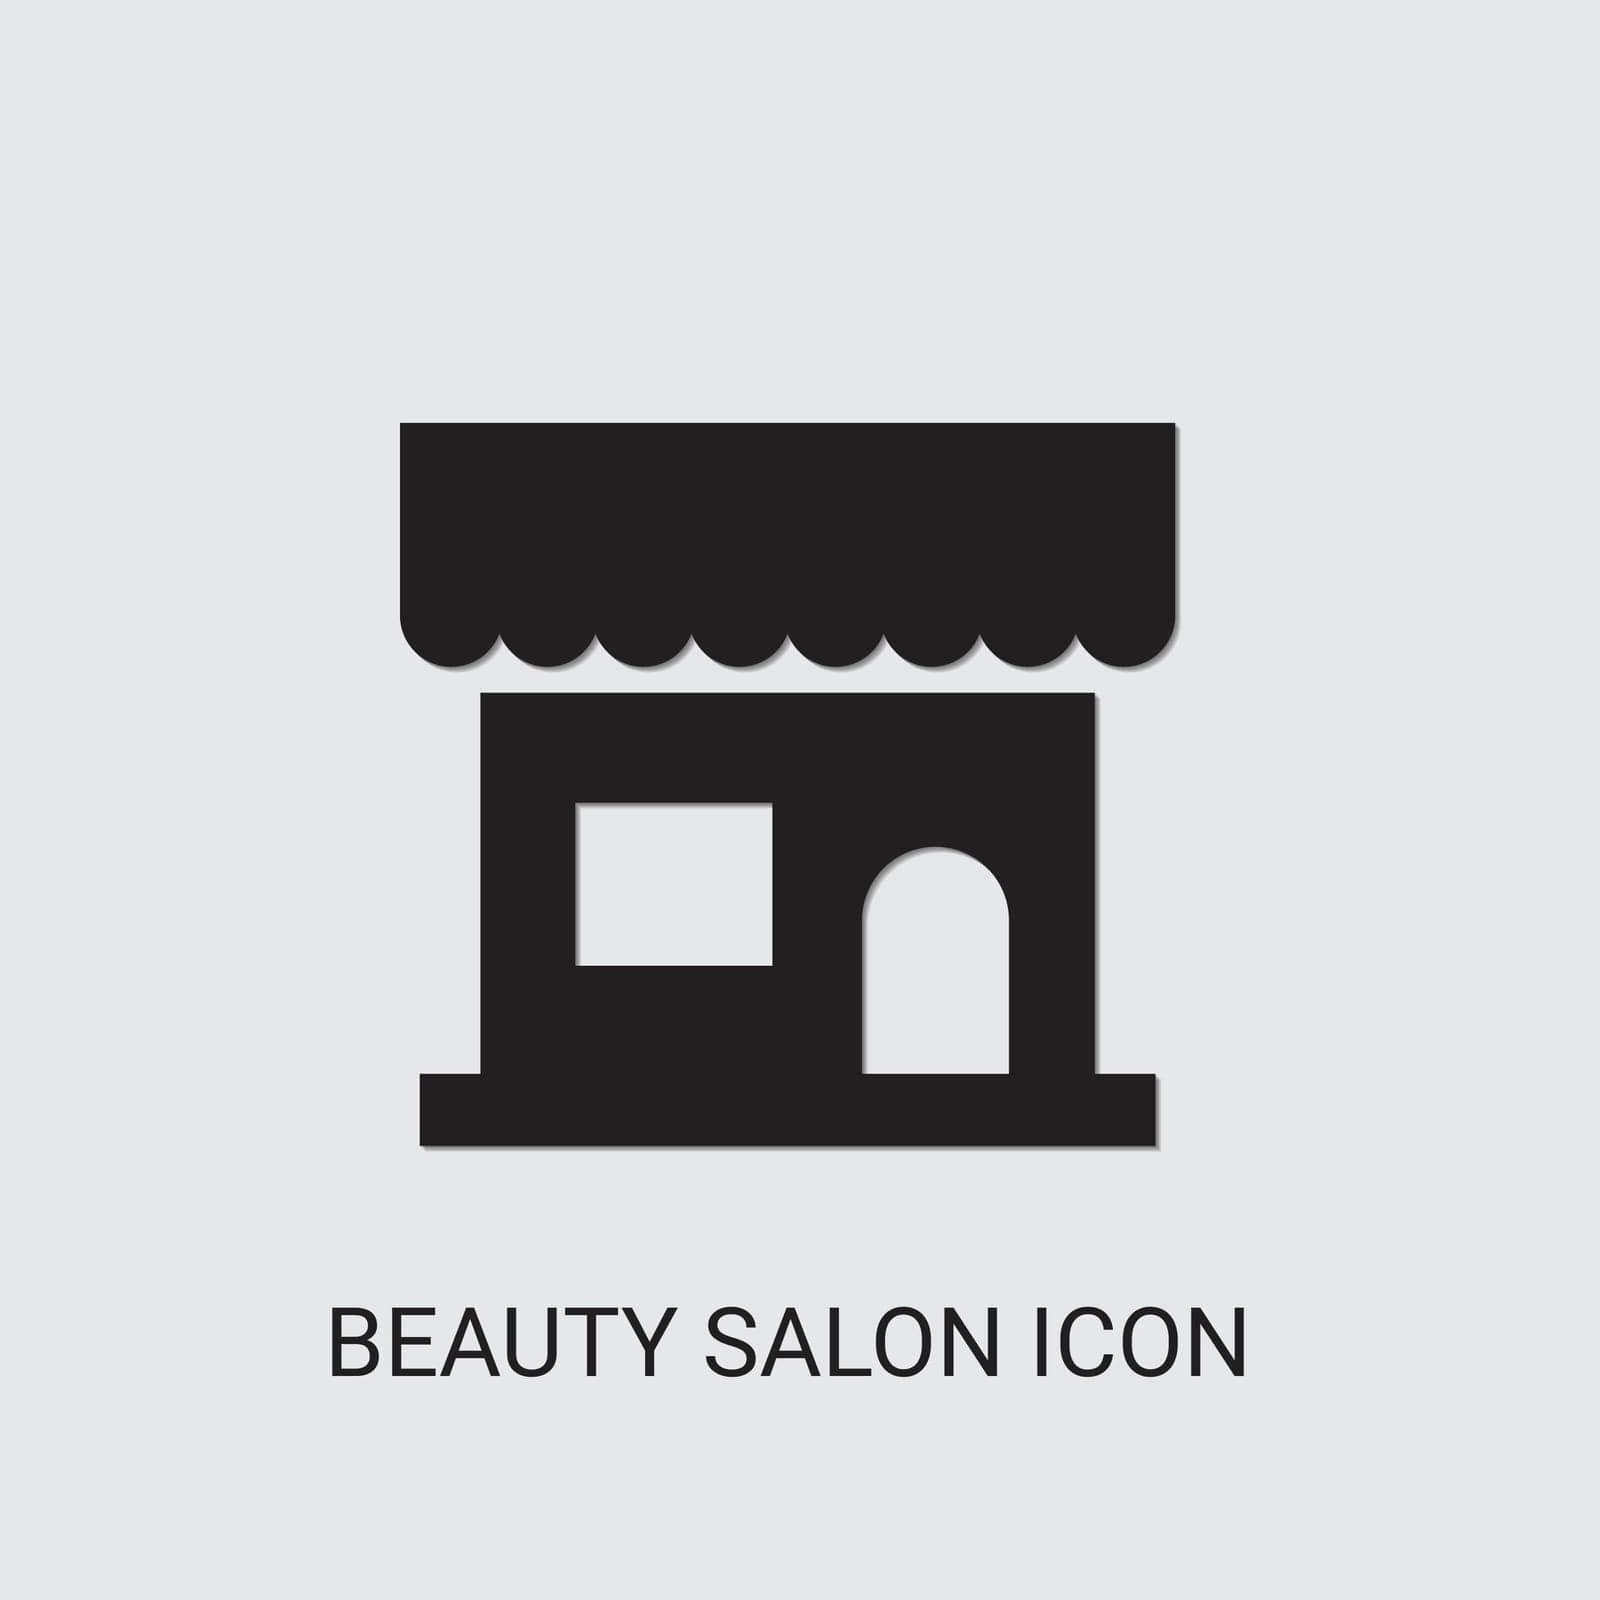 makeup,symbol,shampoo,beauty,line,pattern,icon,sign,isolated,cosmetics,hair,hairdresser,design,cosmetic,vector,barber,female,set,nature,nail,hairdressing,hairbrush,filled,haircut,comb,scissors,background,illustration,polish,fashion,care,salon